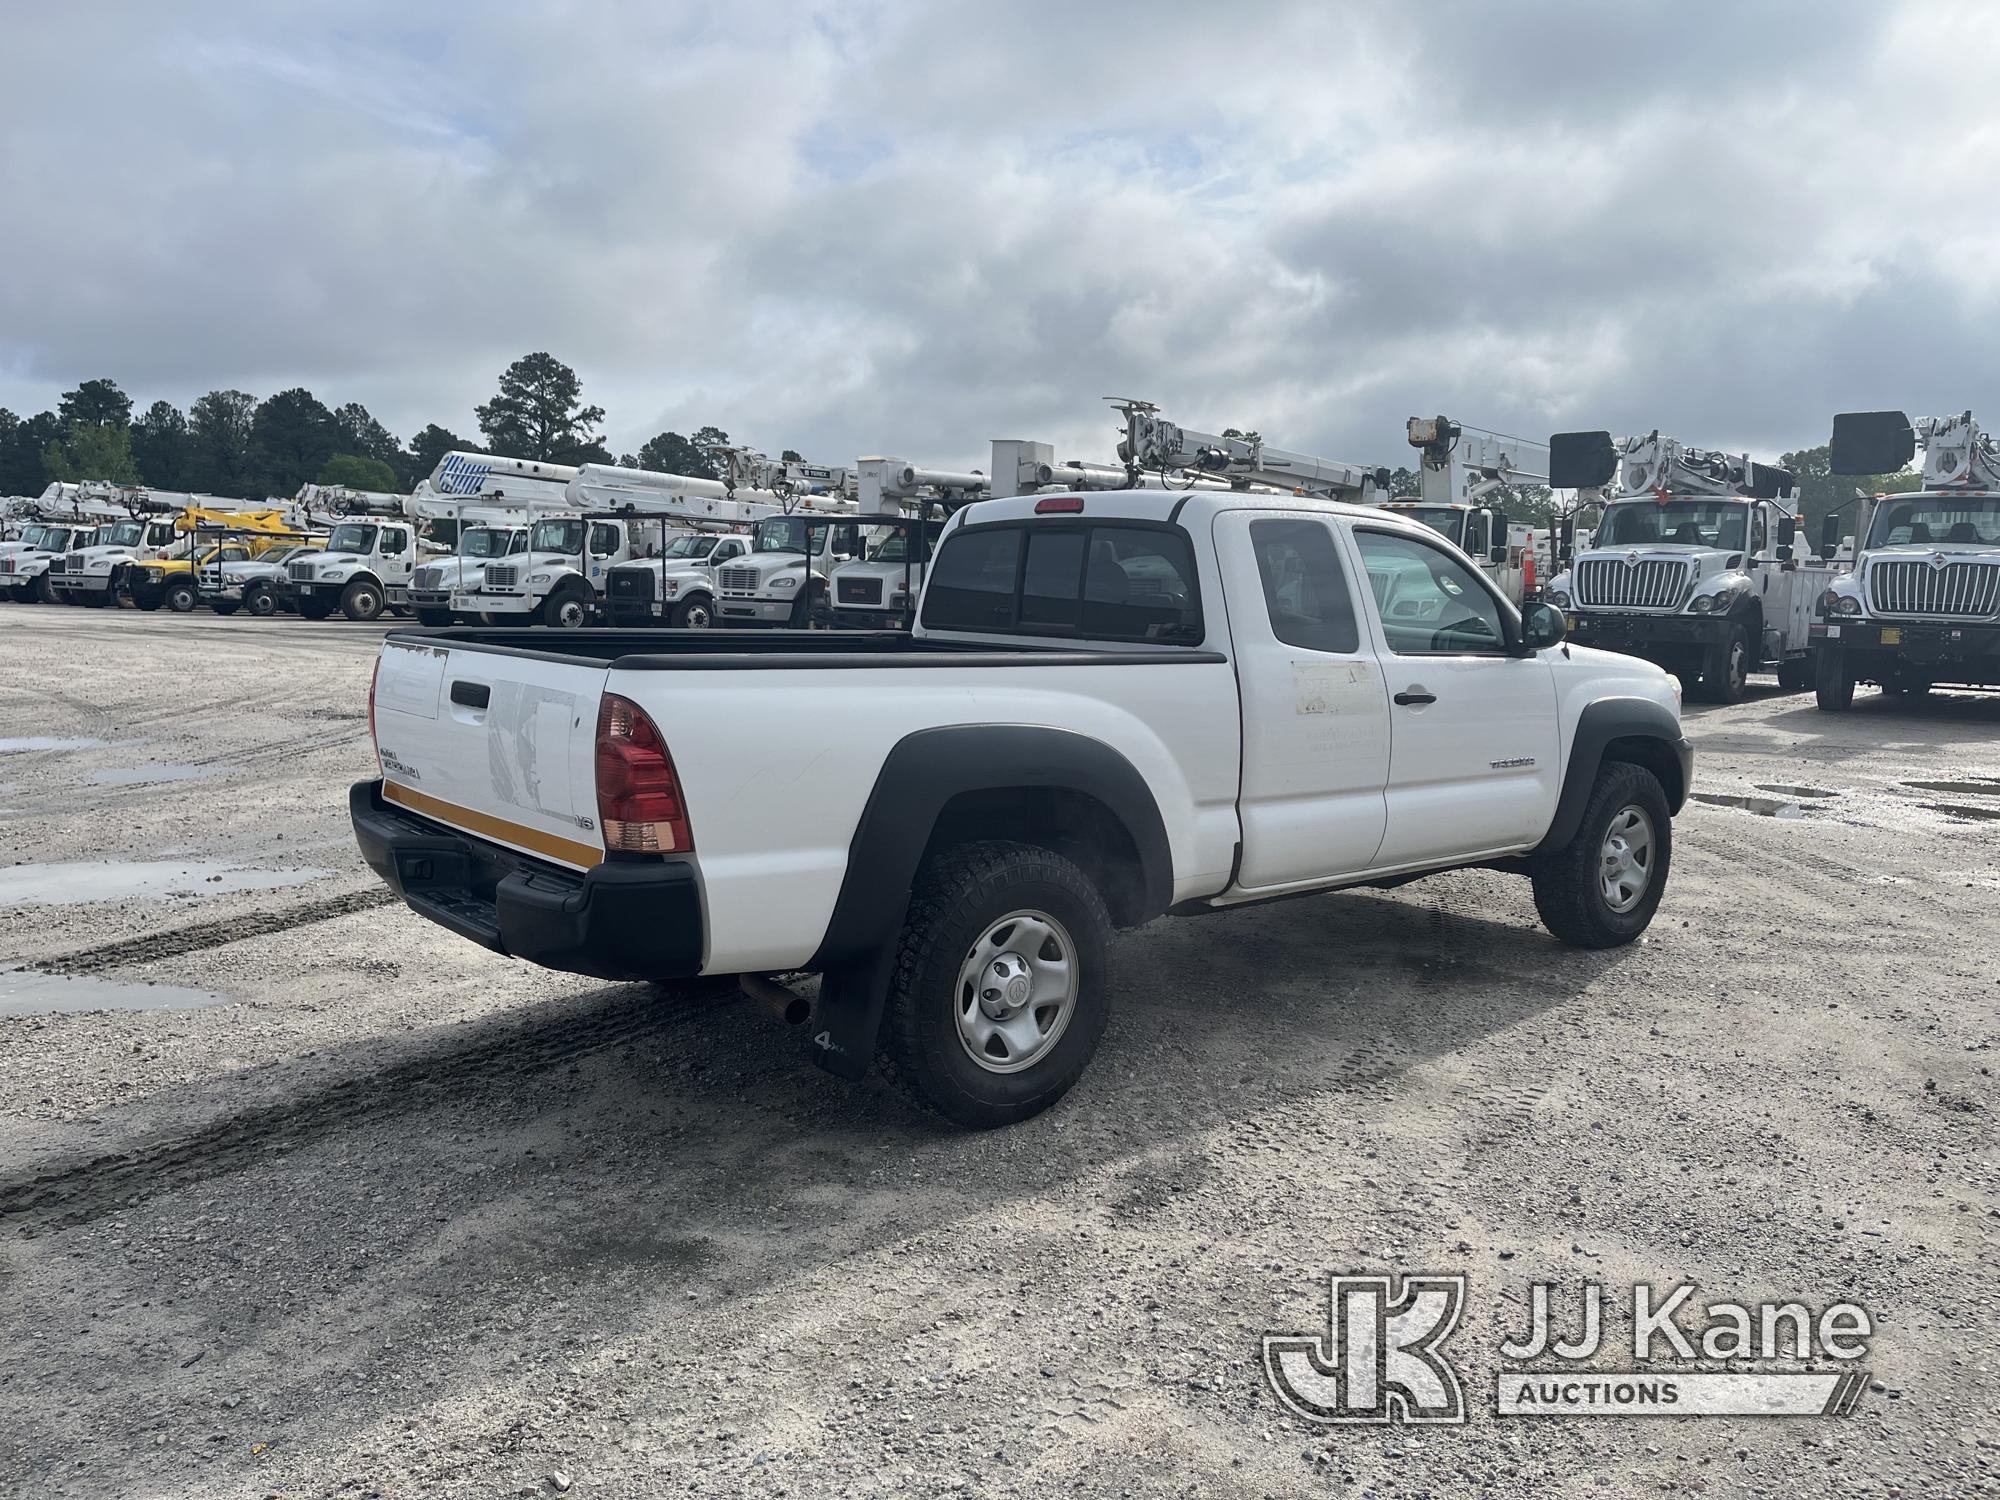 (Chester, VA) 2015 Toyota Tacoma 4x4 Extended-Cab Pickup Truck Runs & Moves) (Maint Required Light O